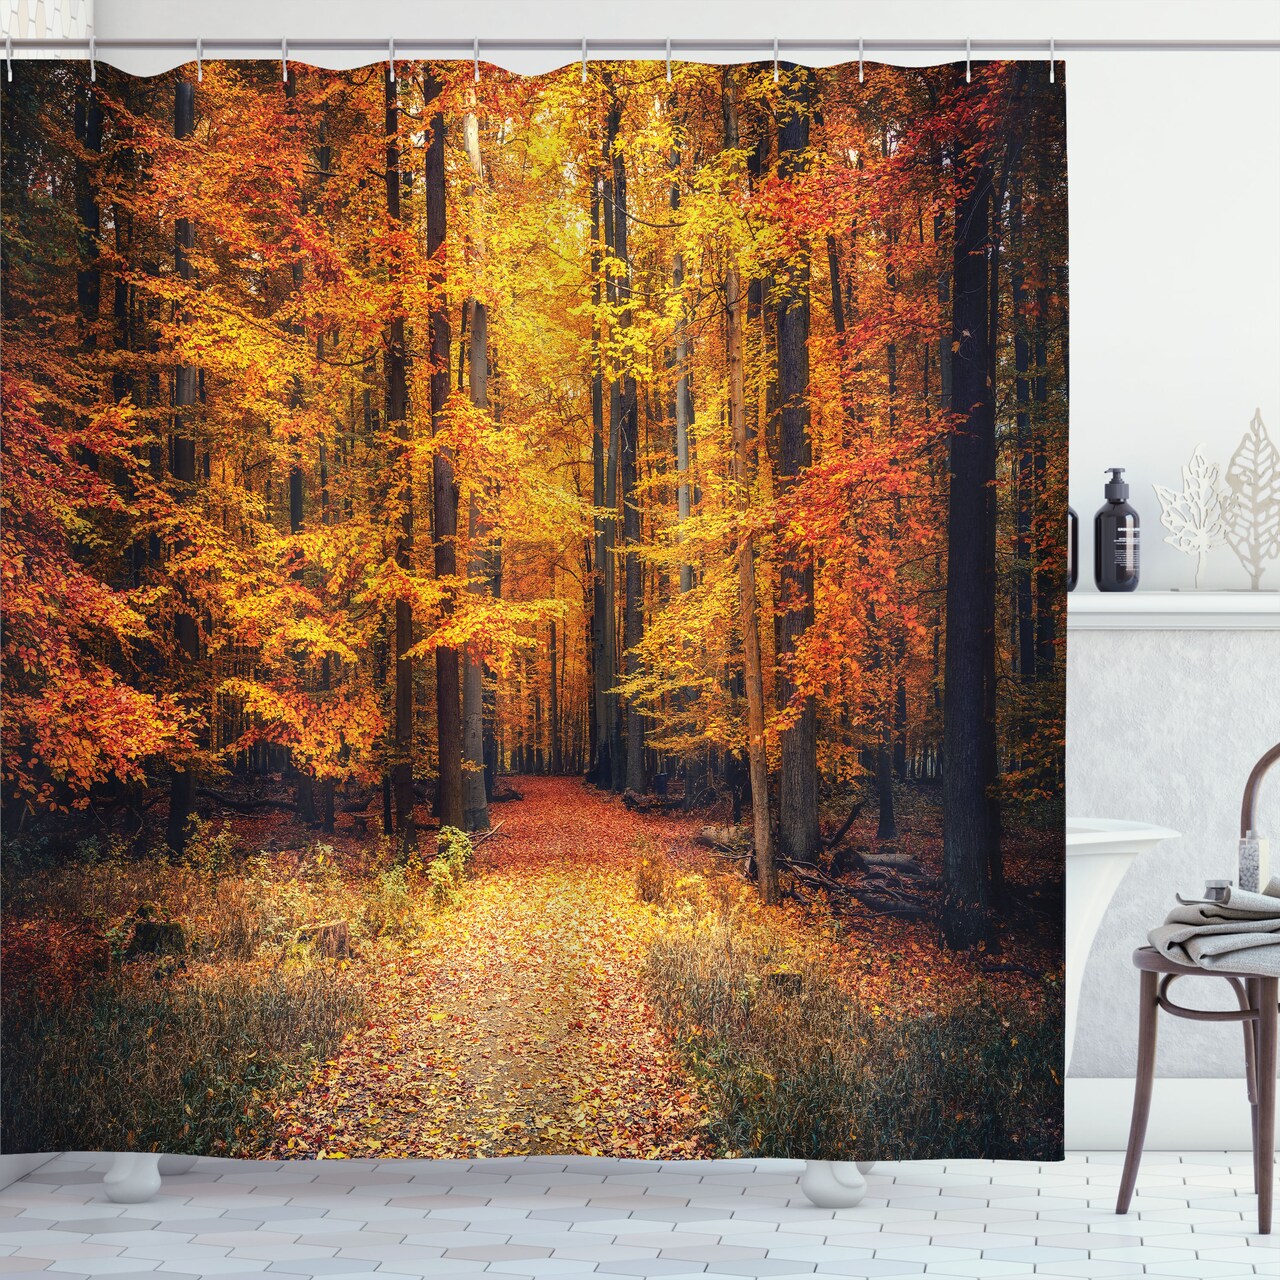 Ambesonne Forest Shower Curtain, Fall Photo in National Park Vivid Leaf  Plant Eco Earth Mystical Theme, Cloth Fabric Bathroom Decor Set with Hooks,  69 W x 70 L, Orange Brown